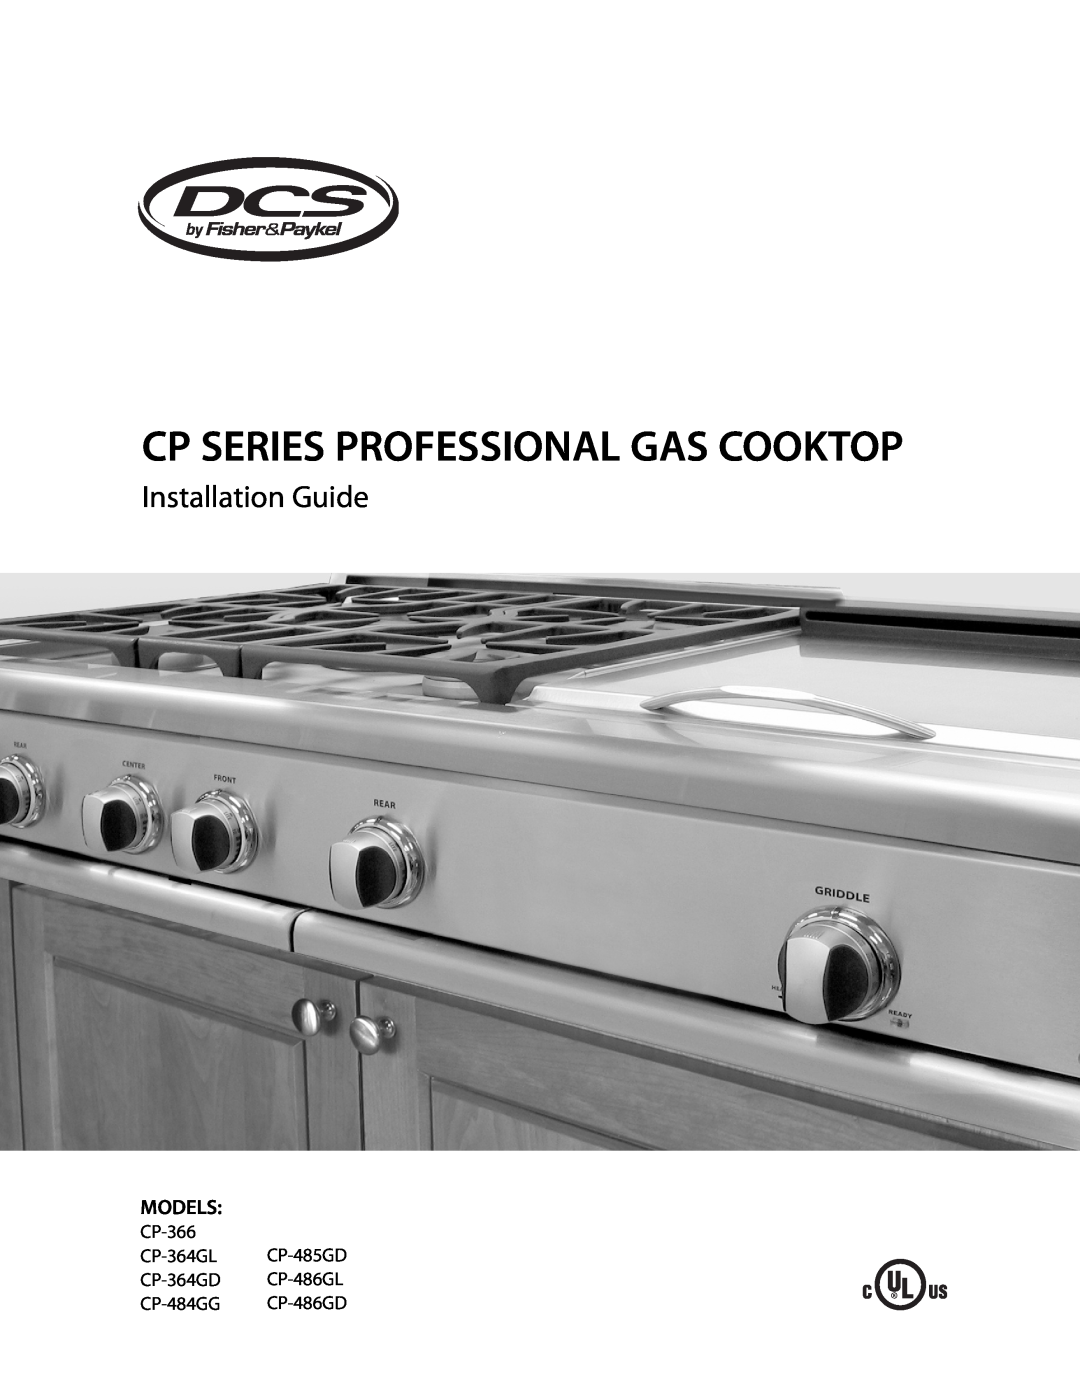 Fisher & Paykel CP-364GD, CP-486GD, CP-485GD, CP-364GL manual Cp Series Professional Gas Cooktop, Installation Guide, Models 